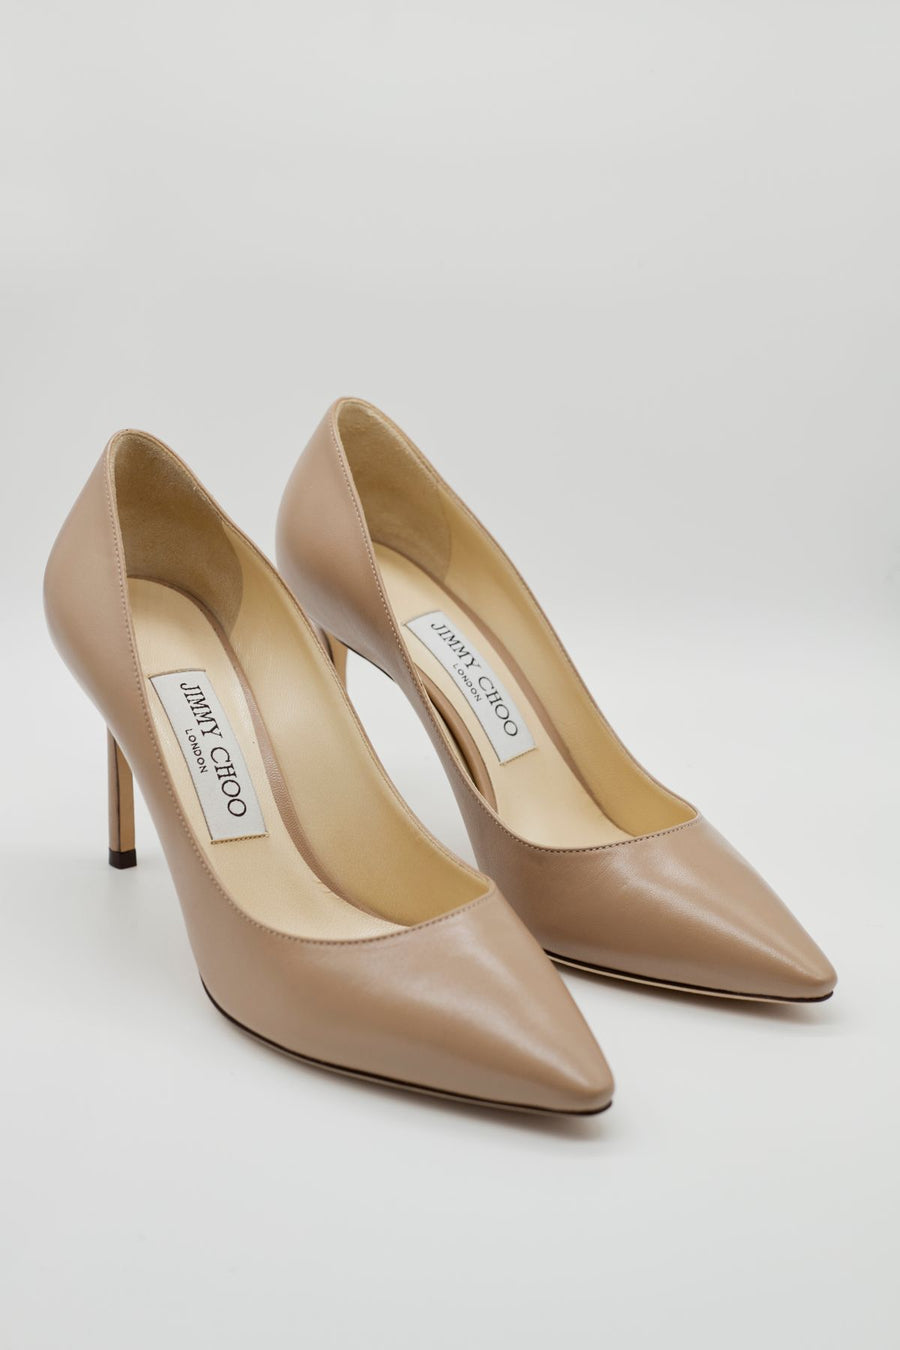 Nude Pointy Toe Stiletto Pump Shoes